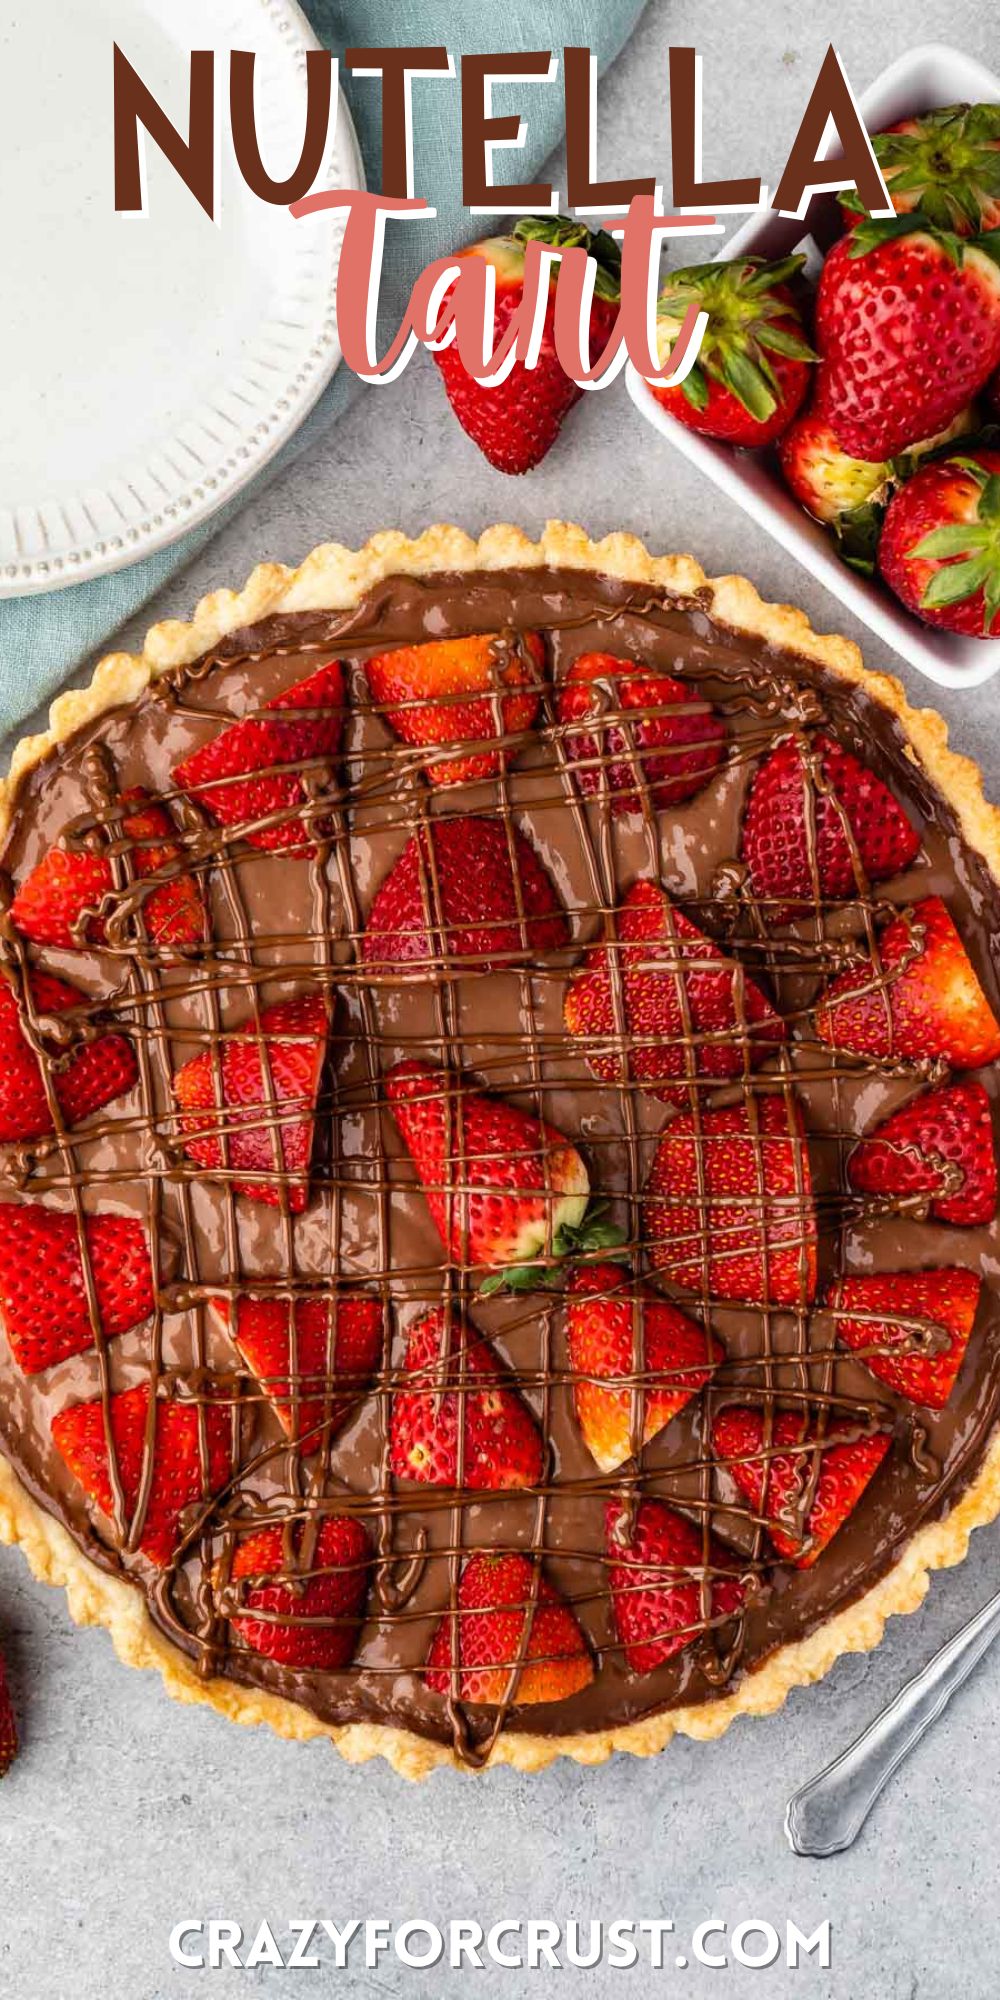 tart in crust covered with chocolate and strawberries with words on the image.